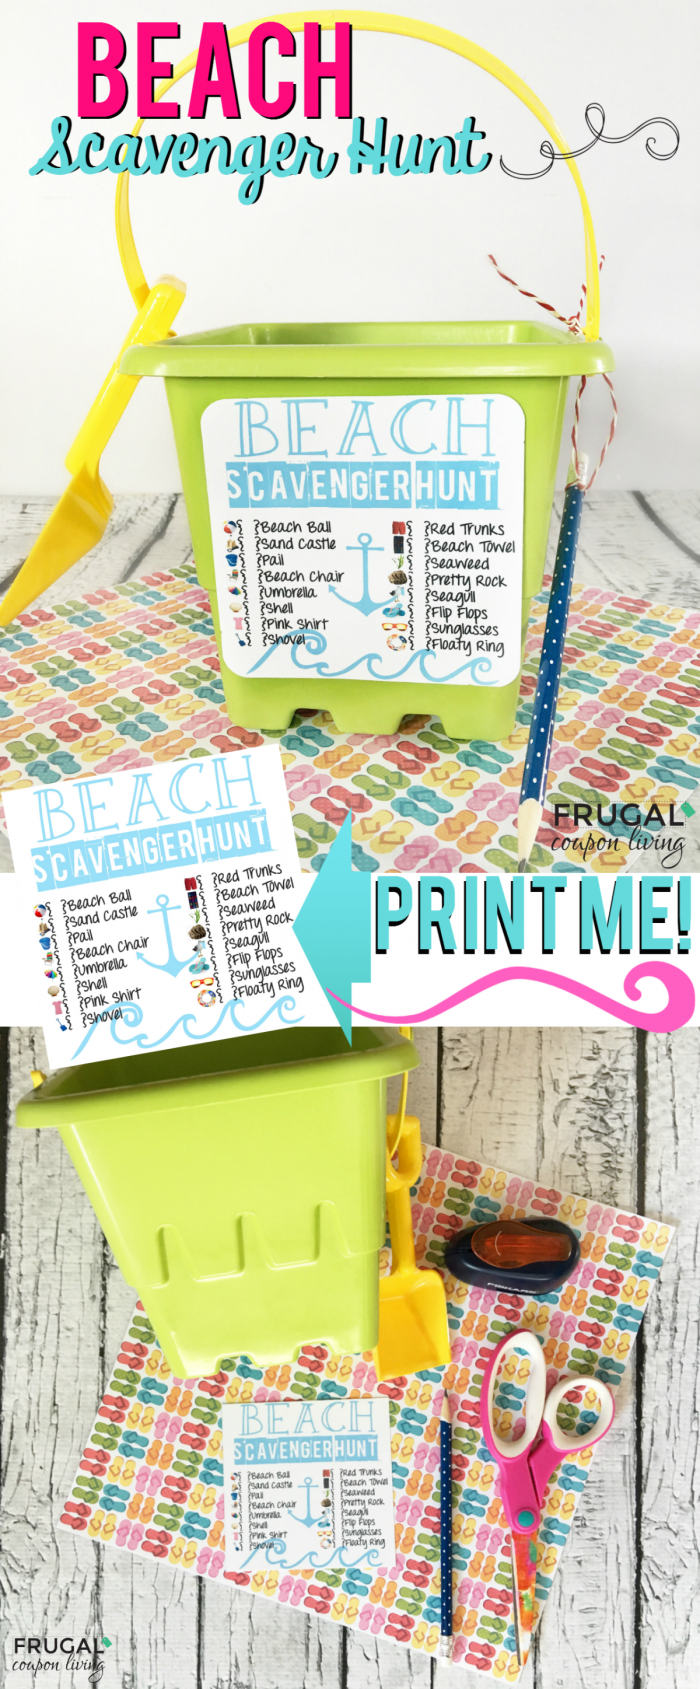 beach-scavenger-hunt-collage-frugal-coupon-living